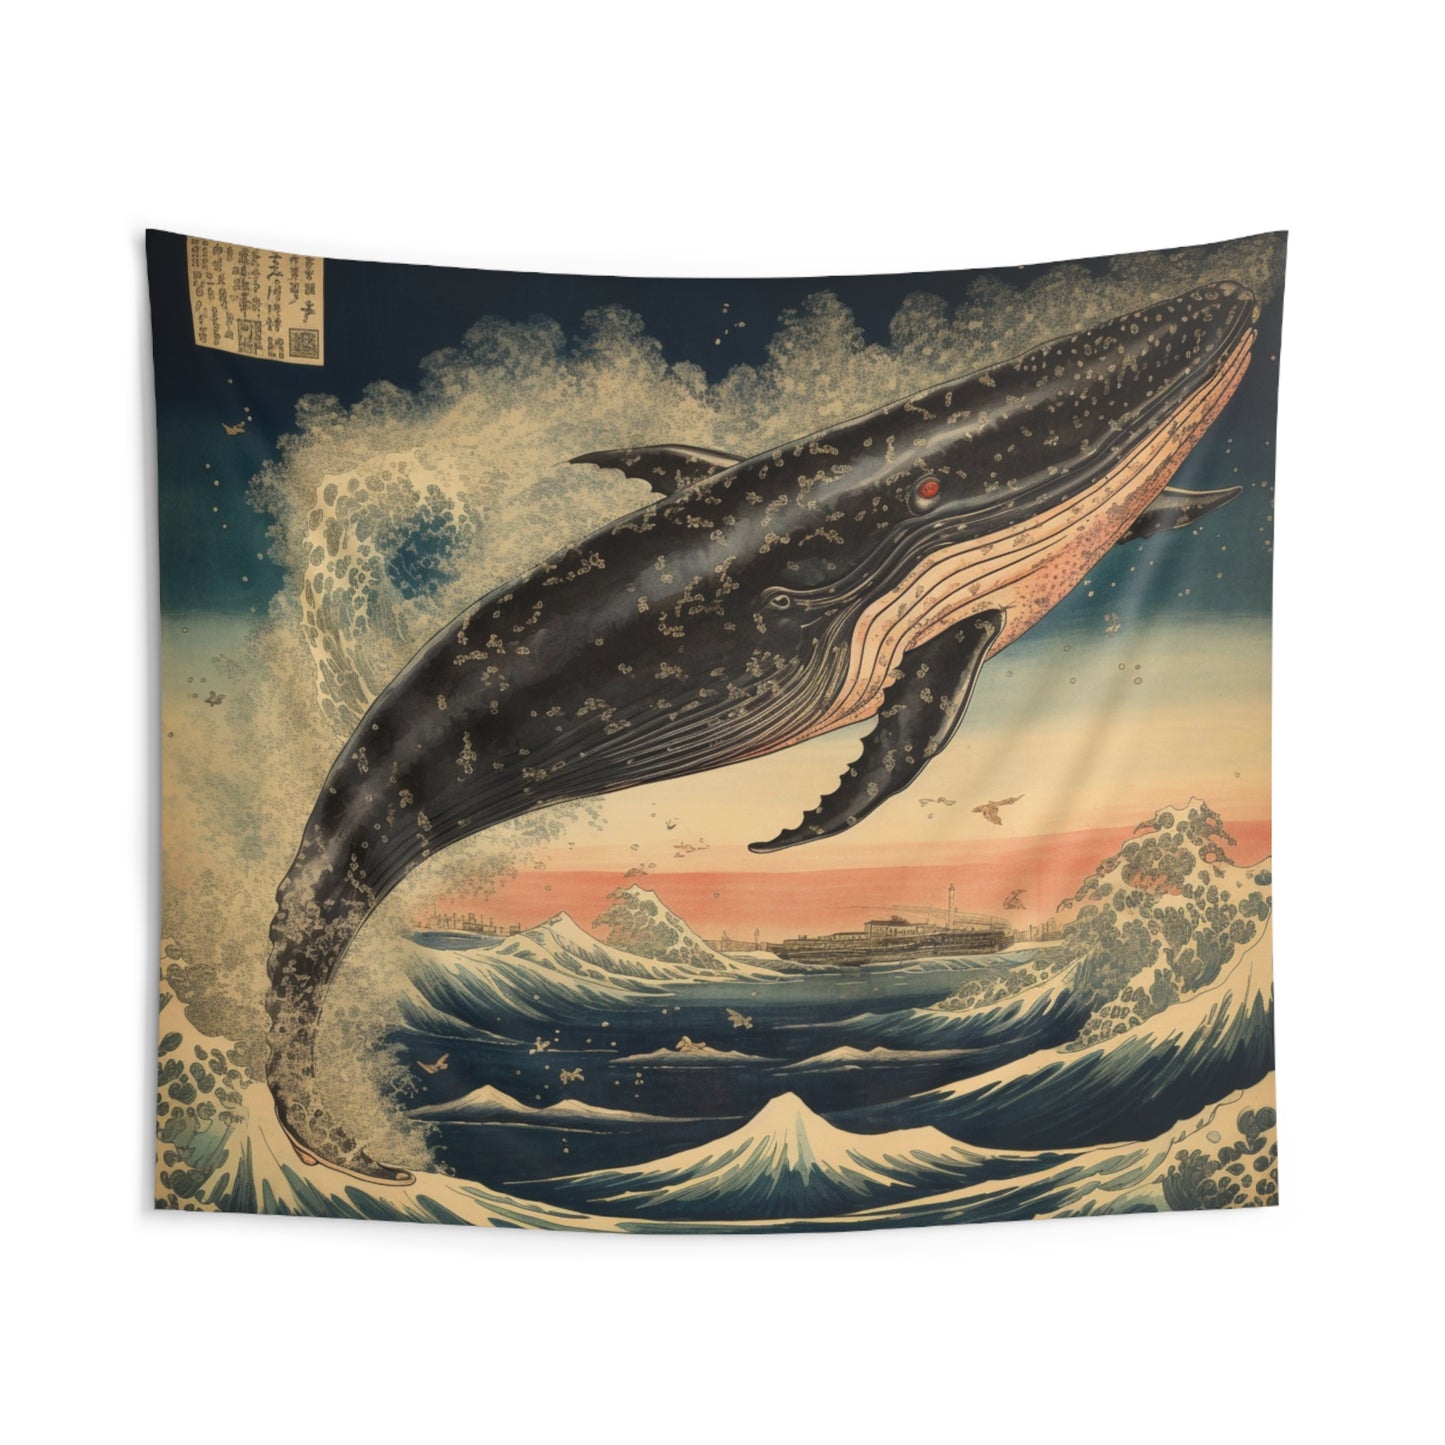 Whale Tapestry, Japanese Ocean Waves Wall Art Hanging Landscape Aesthetic Large Small Decor Bedroom College Dorm Room